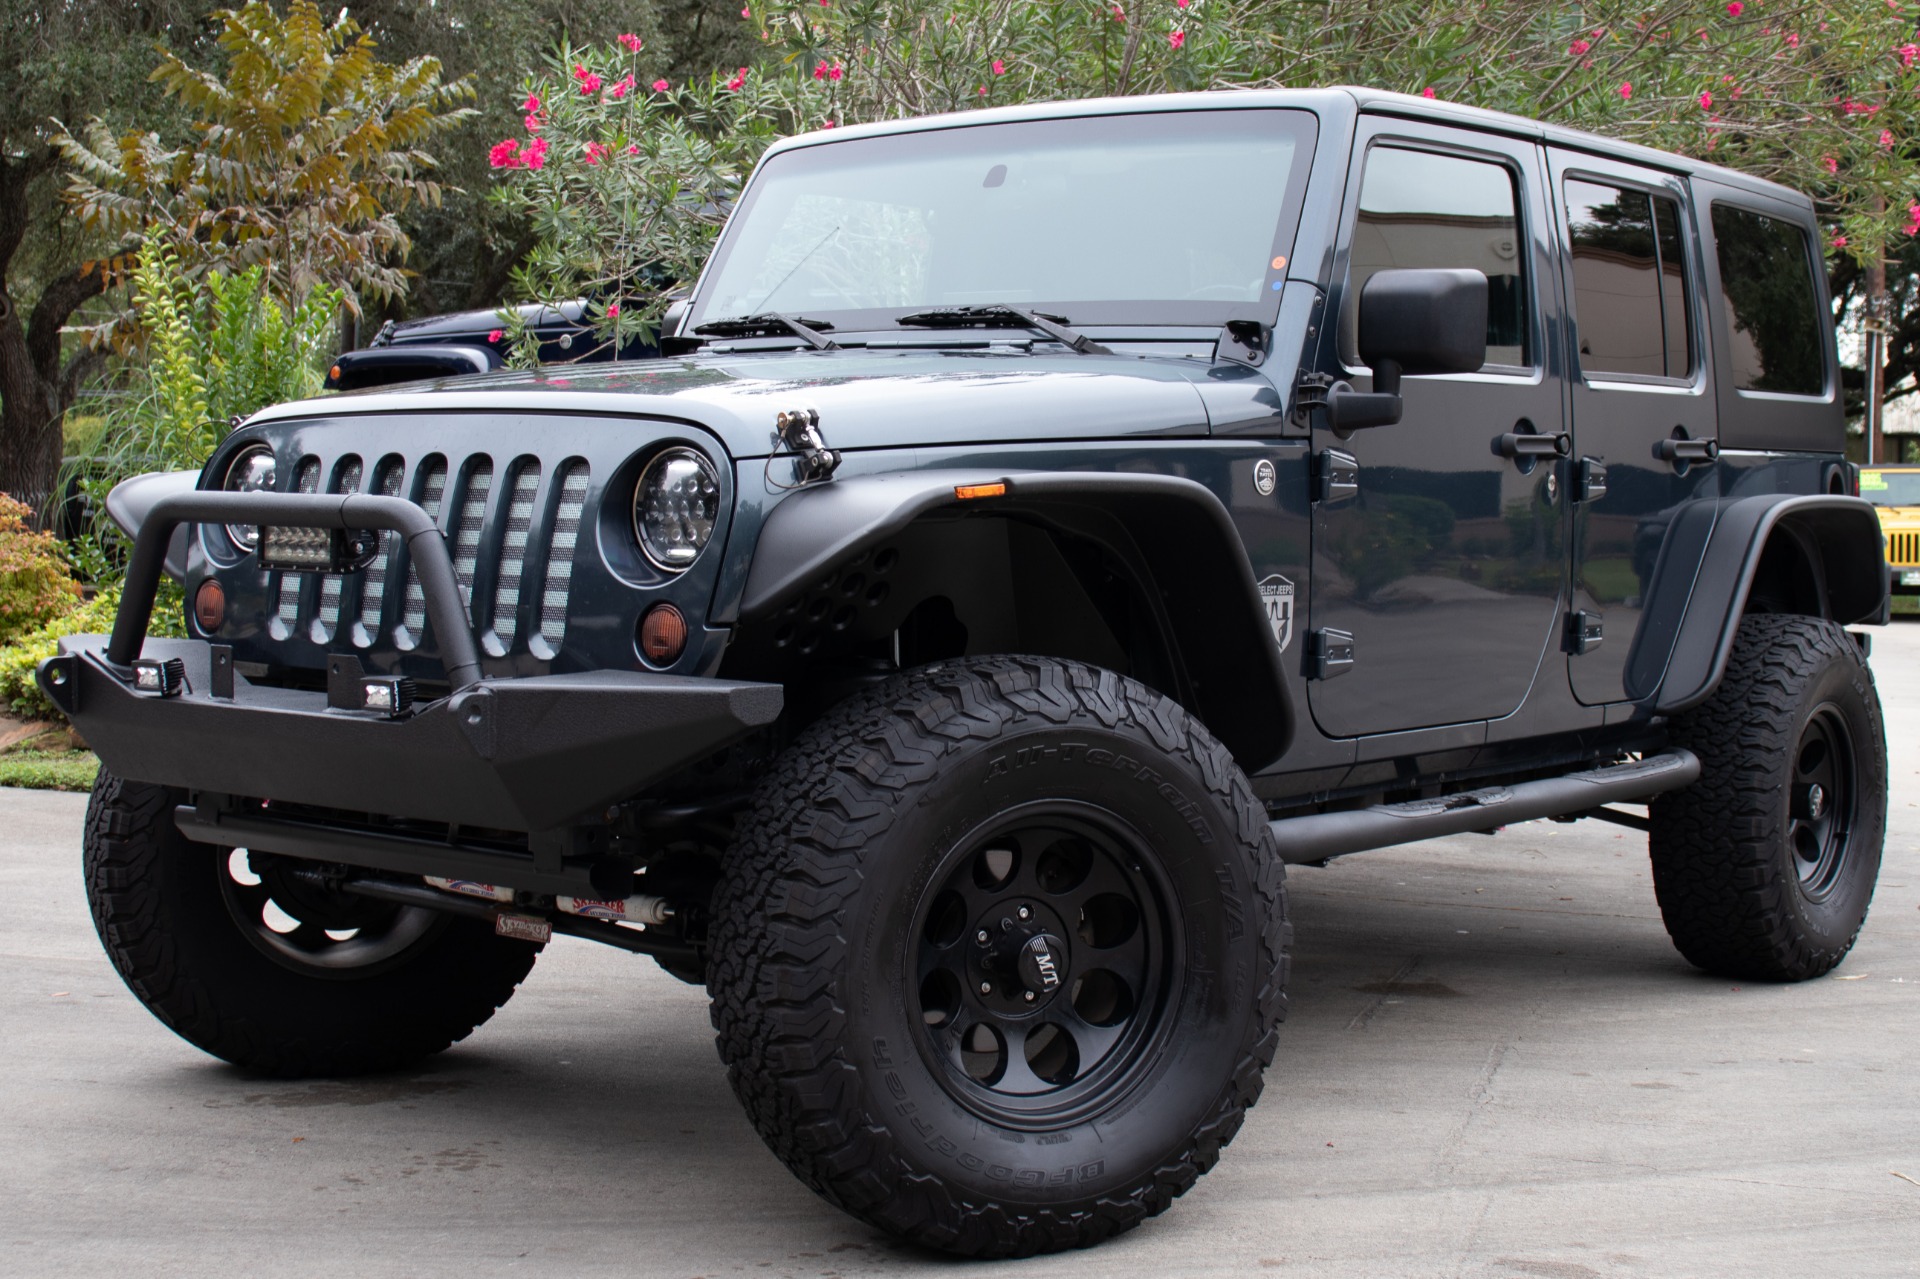 Used 2008 Jeep Wrangler Unlimited X  For Sale 18 995 